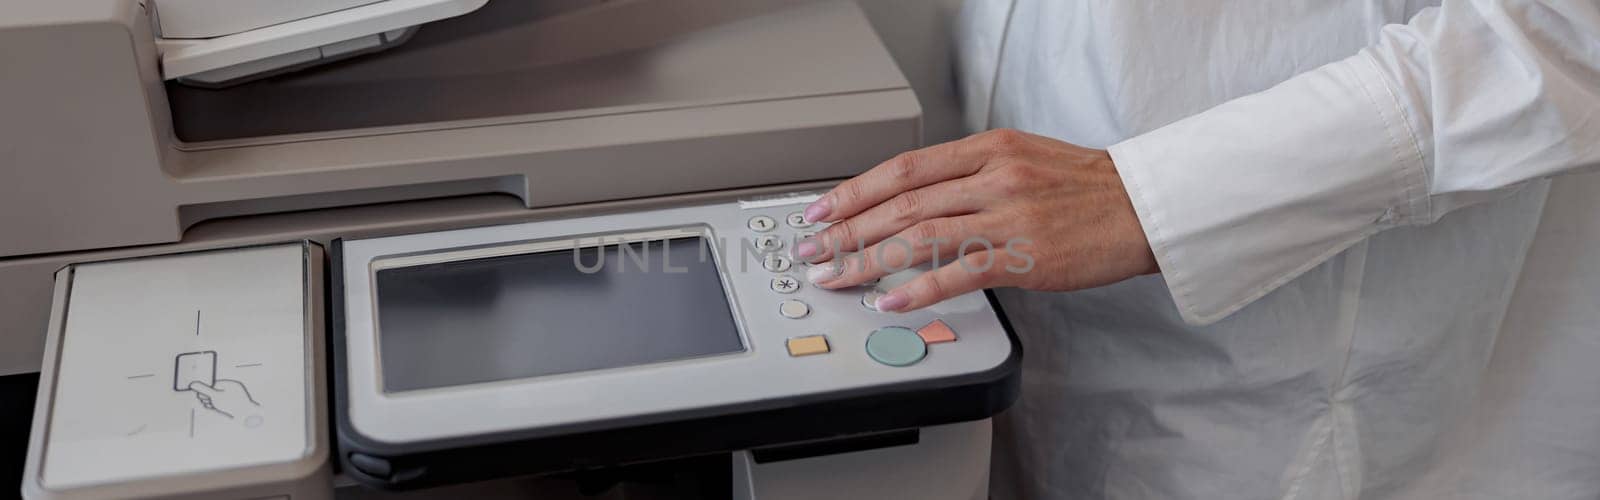 Close up of woman worker scanning a document on photocopy machine In modern office by Yaroslav_astakhov